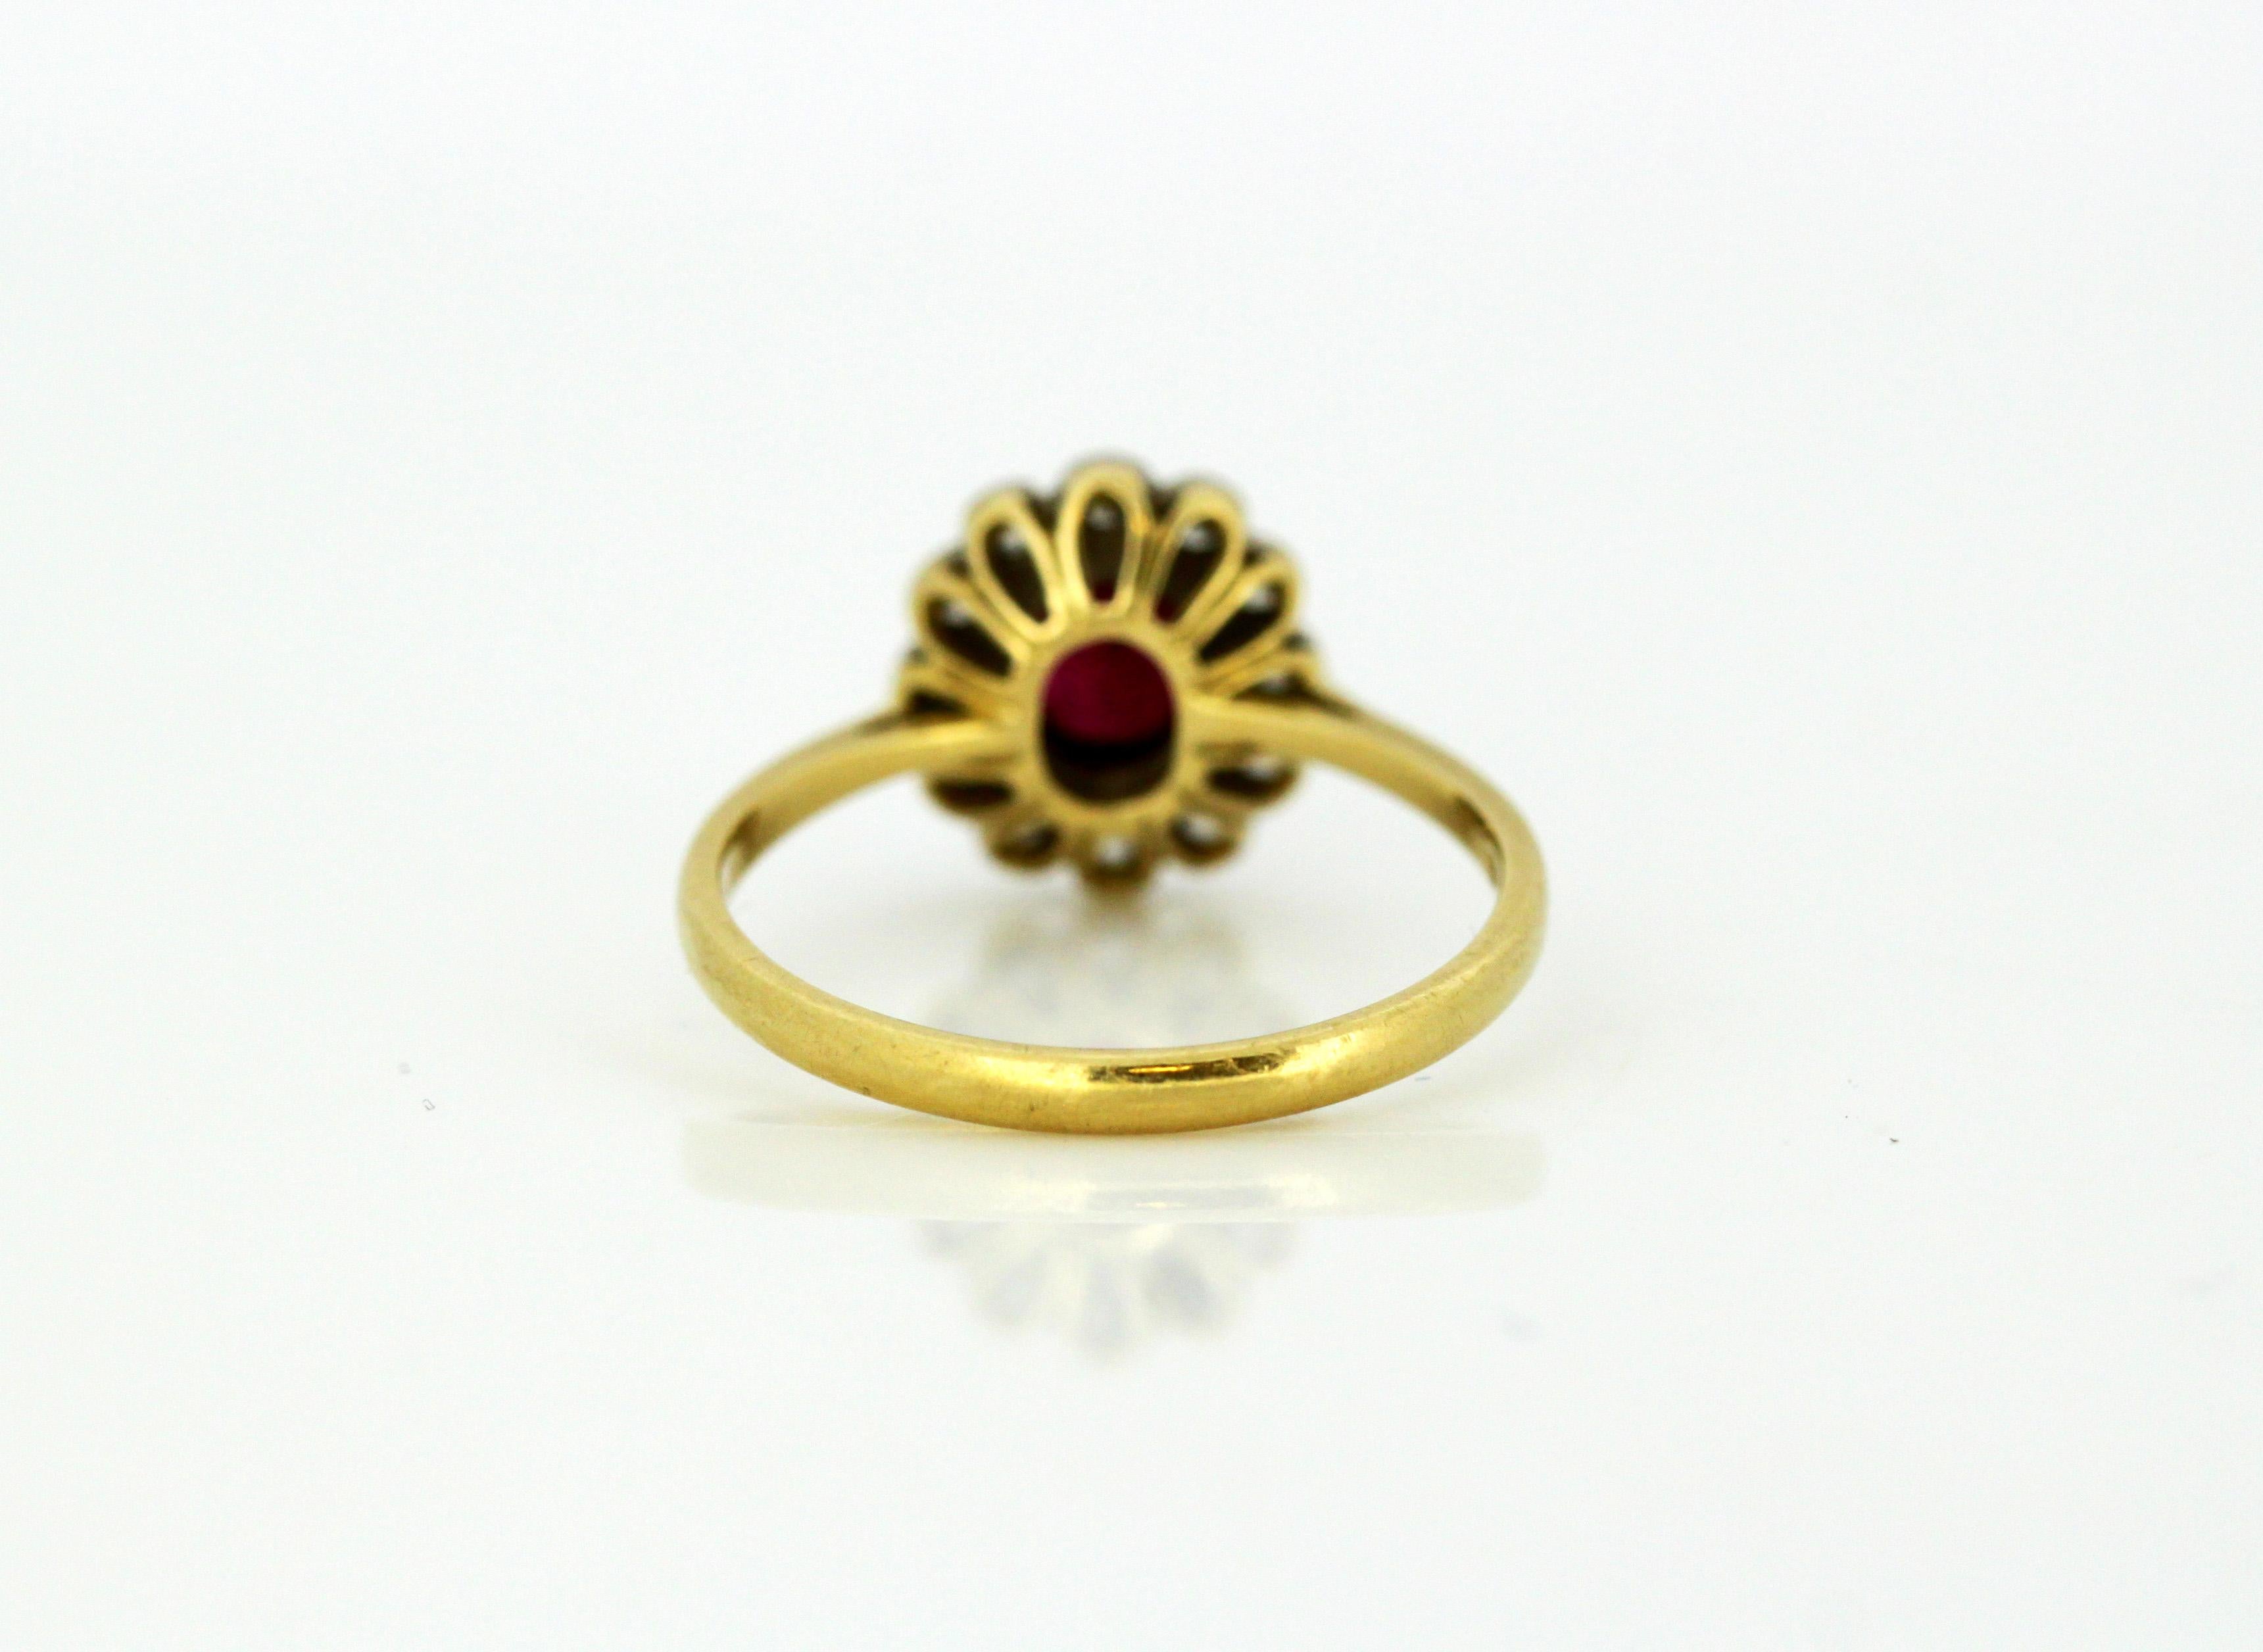 Women's Vintage 18 Karat Gold Ladies Ring with Natural Ruby and Diamonds, London, 1985